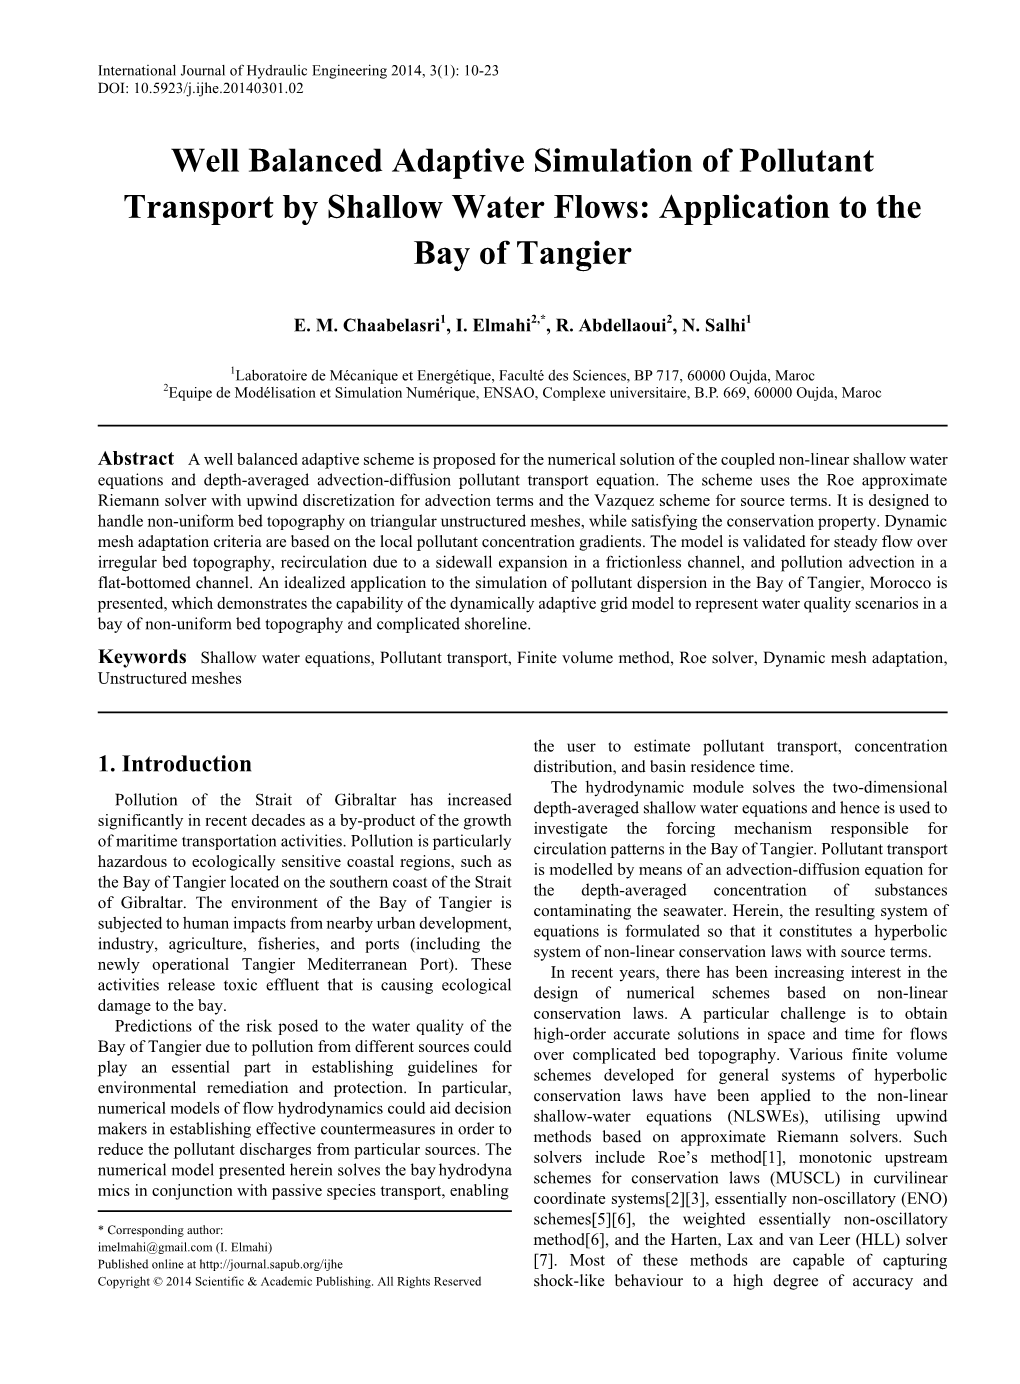 Well Balanced Adaptive Simulation of Pollutant Transport by Shallow Water Flows: Application to the Bay of Tangier